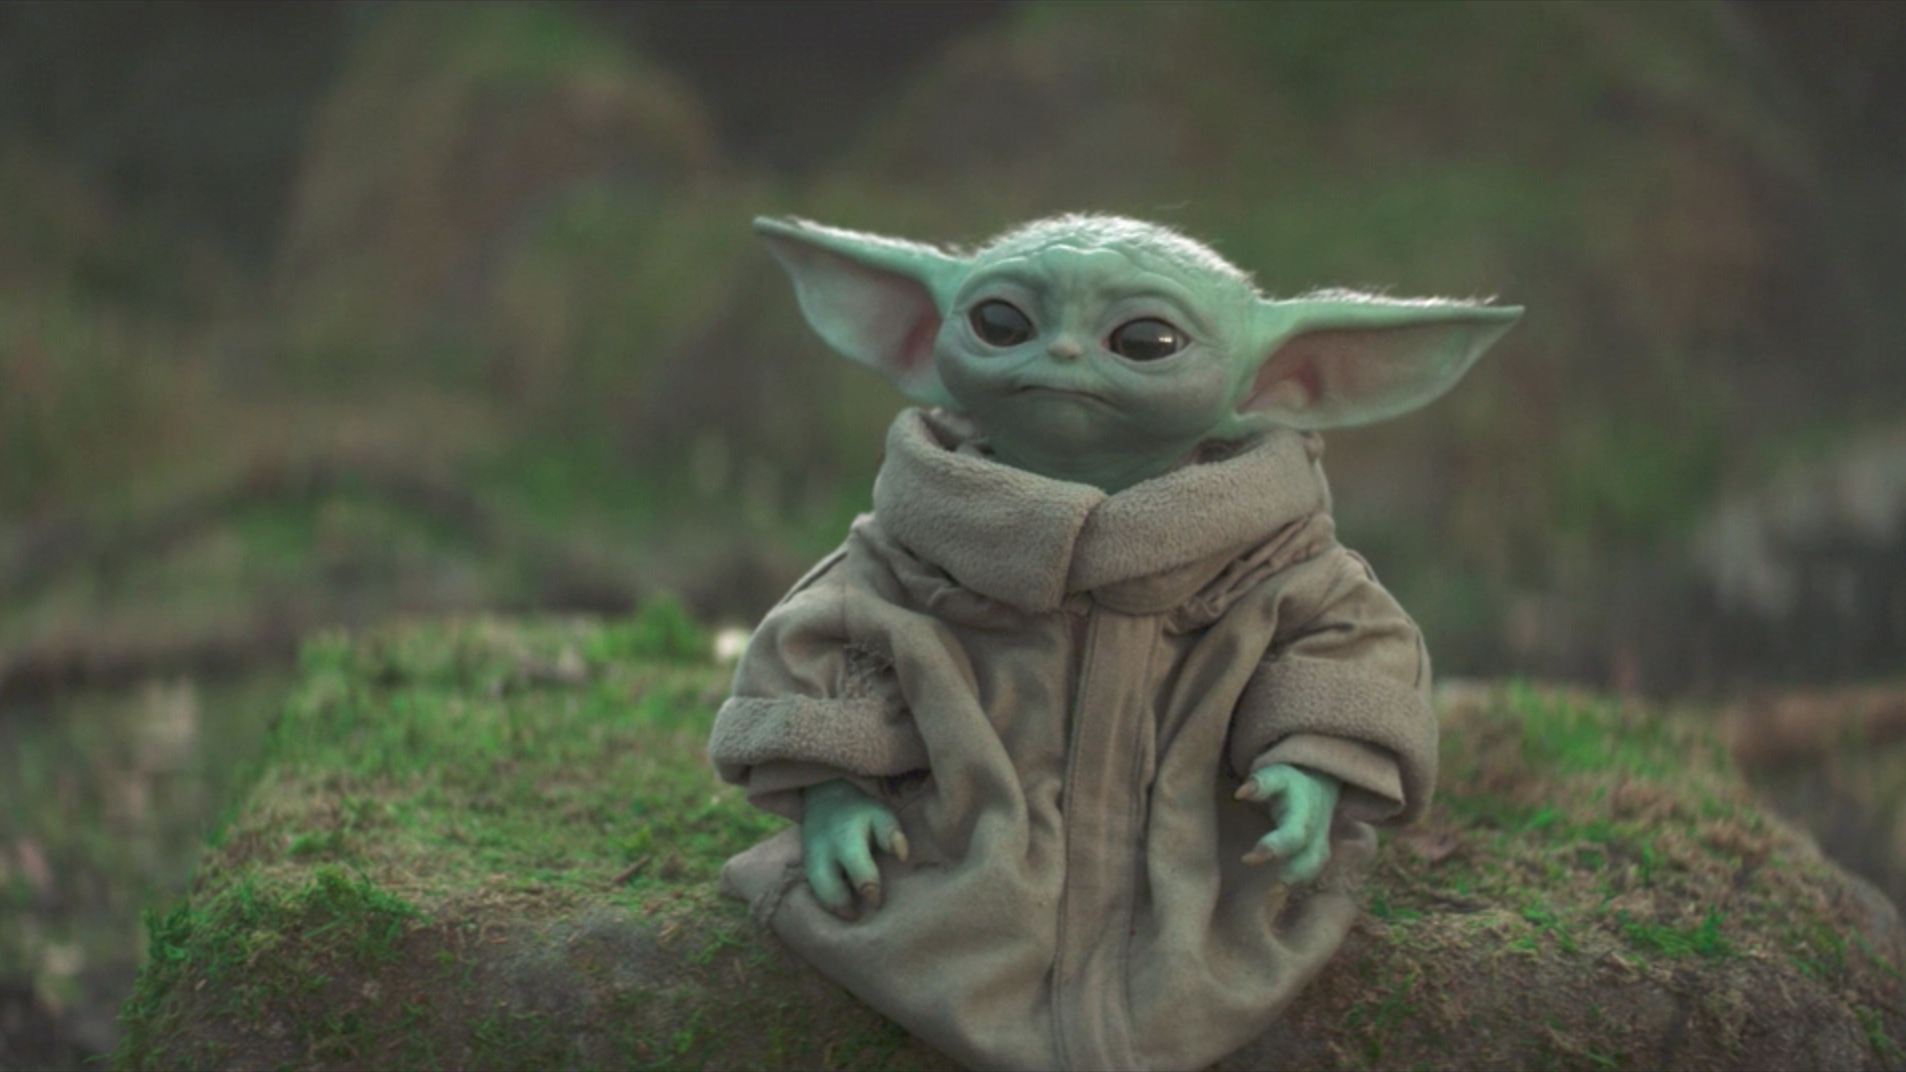 https://hips.hearstapps.com/hmg-prod/images/grogu-baby-yoda-the-child-1606497947.png?crop=0.7444444444444445xw:1xh;center,top